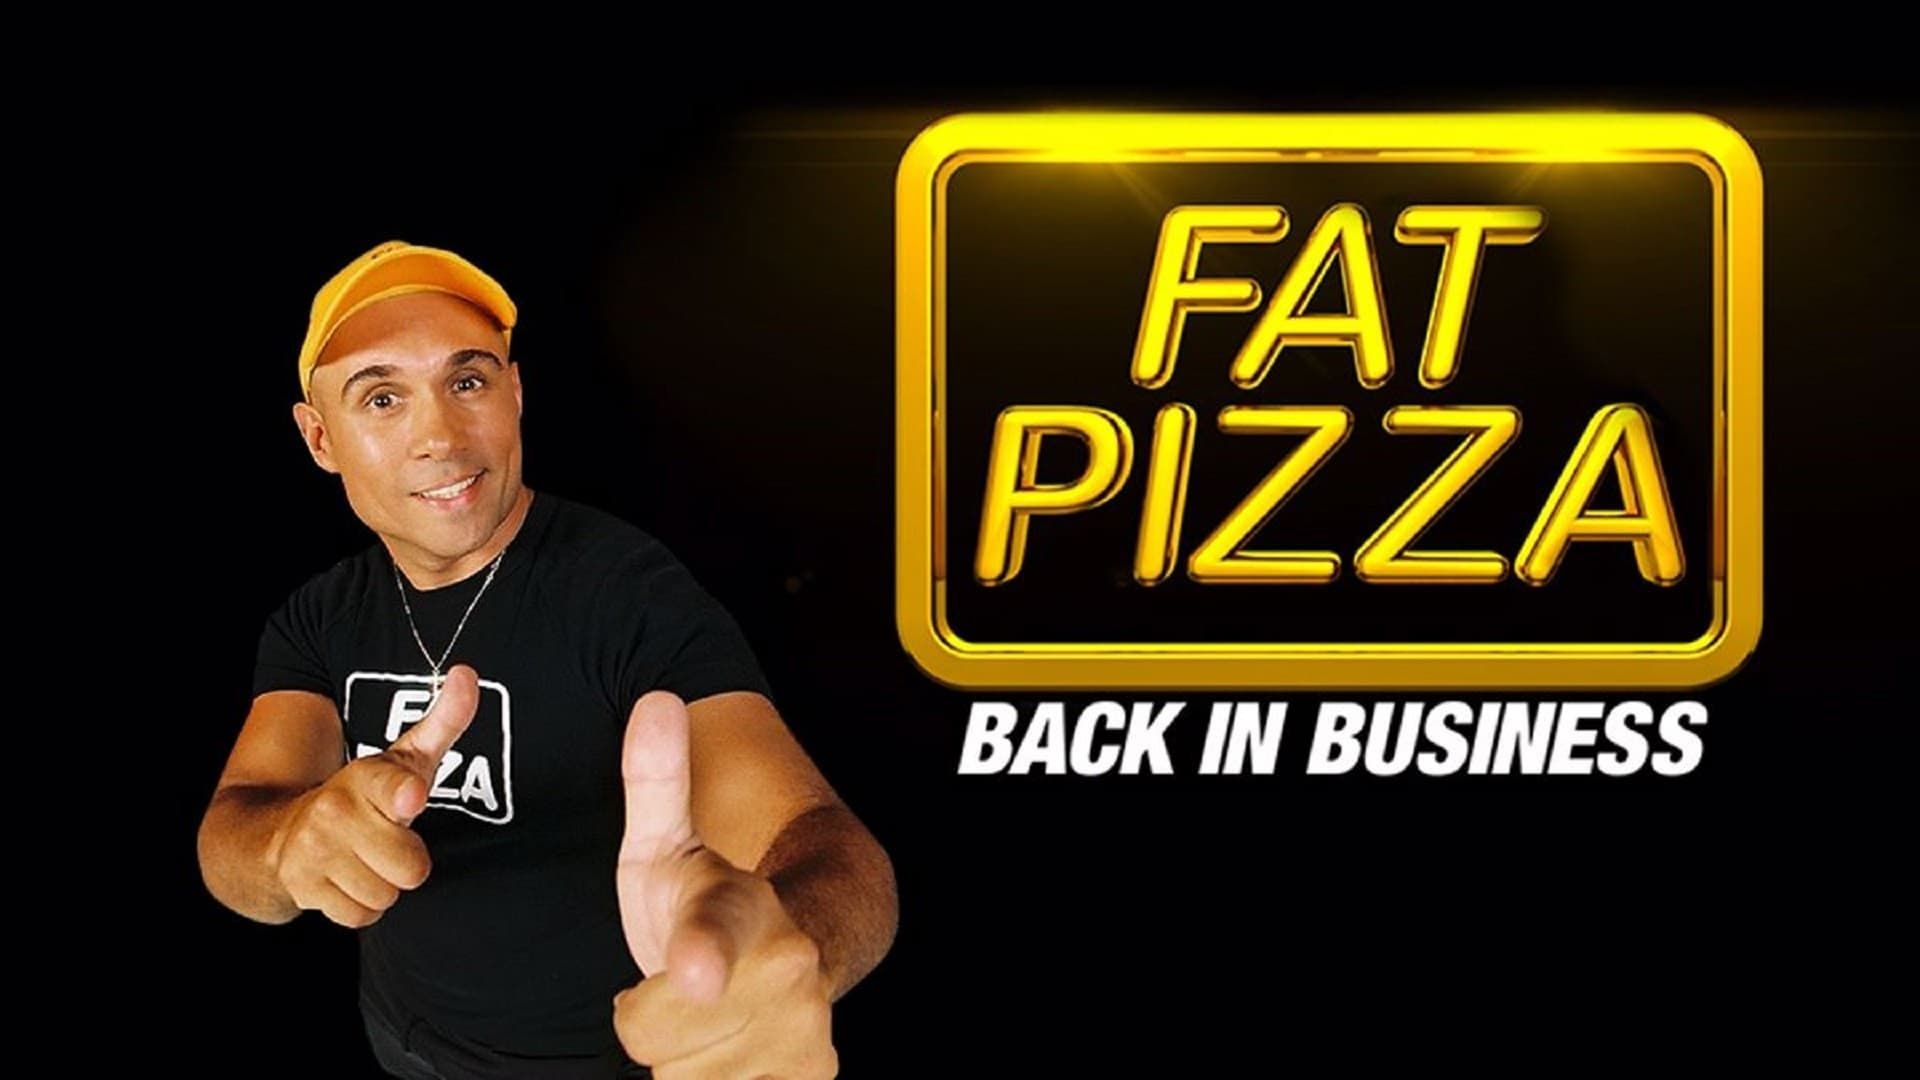 Fat Pizza: Back in Business background